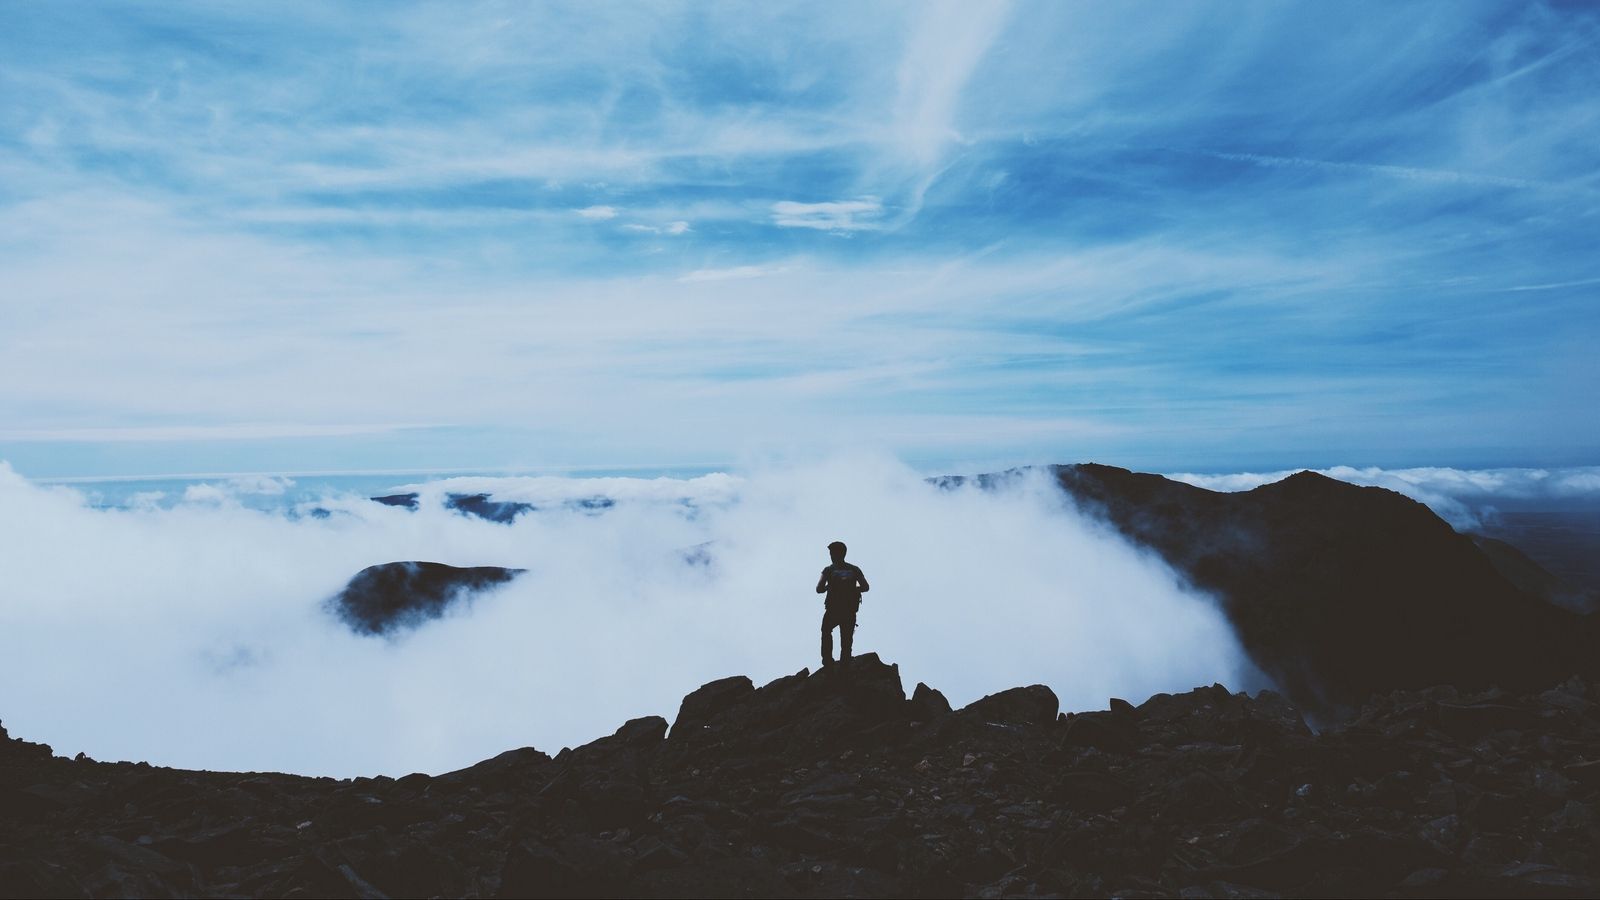 Download wallpaper 1600x900 man, silhouette, mountains, clouds